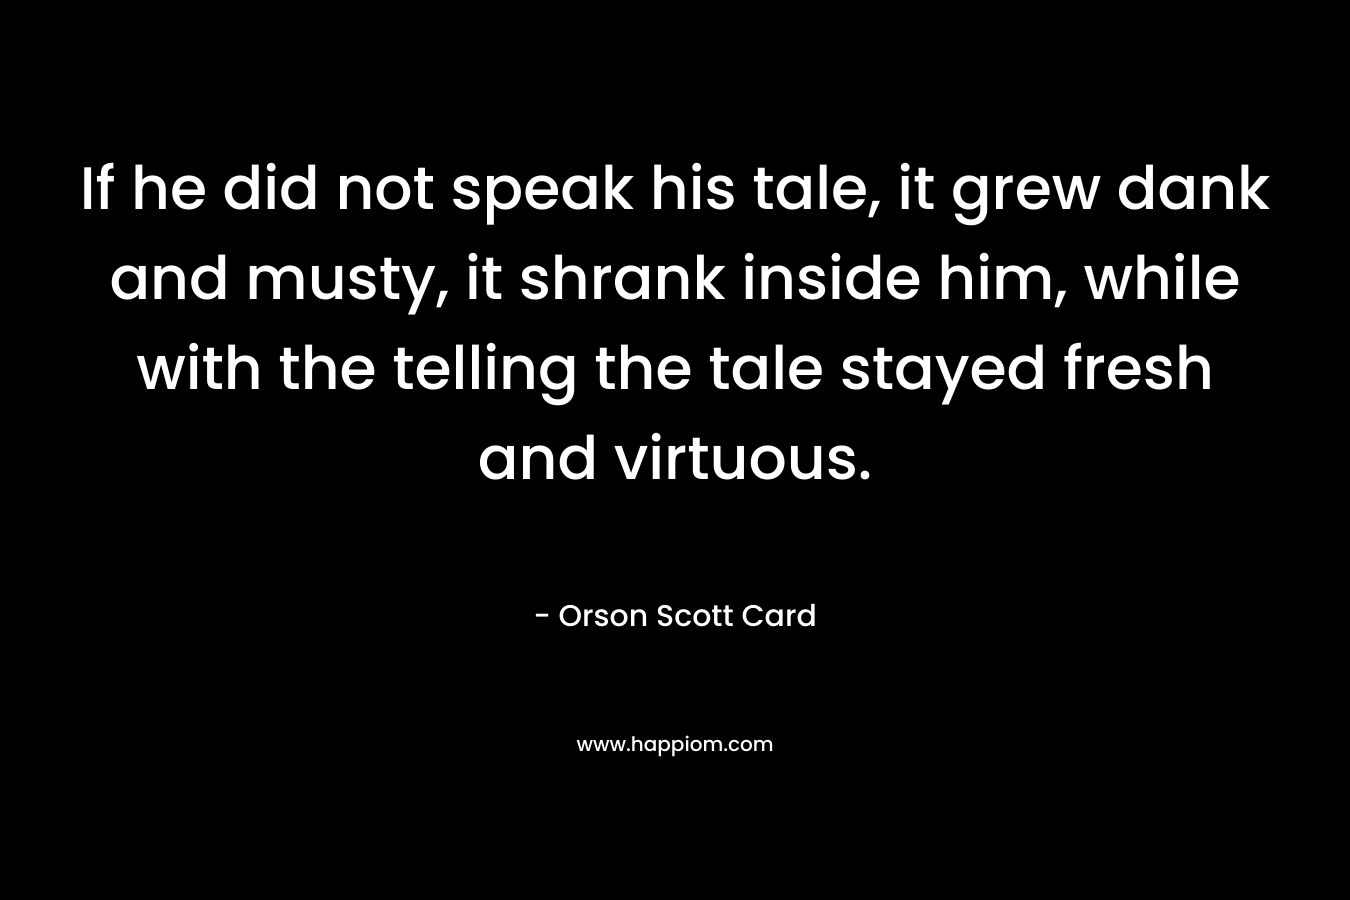 If he did not speak his tale, it grew dank and musty, it shrank inside him, while with the telling the tale stayed fresh and virtuous.